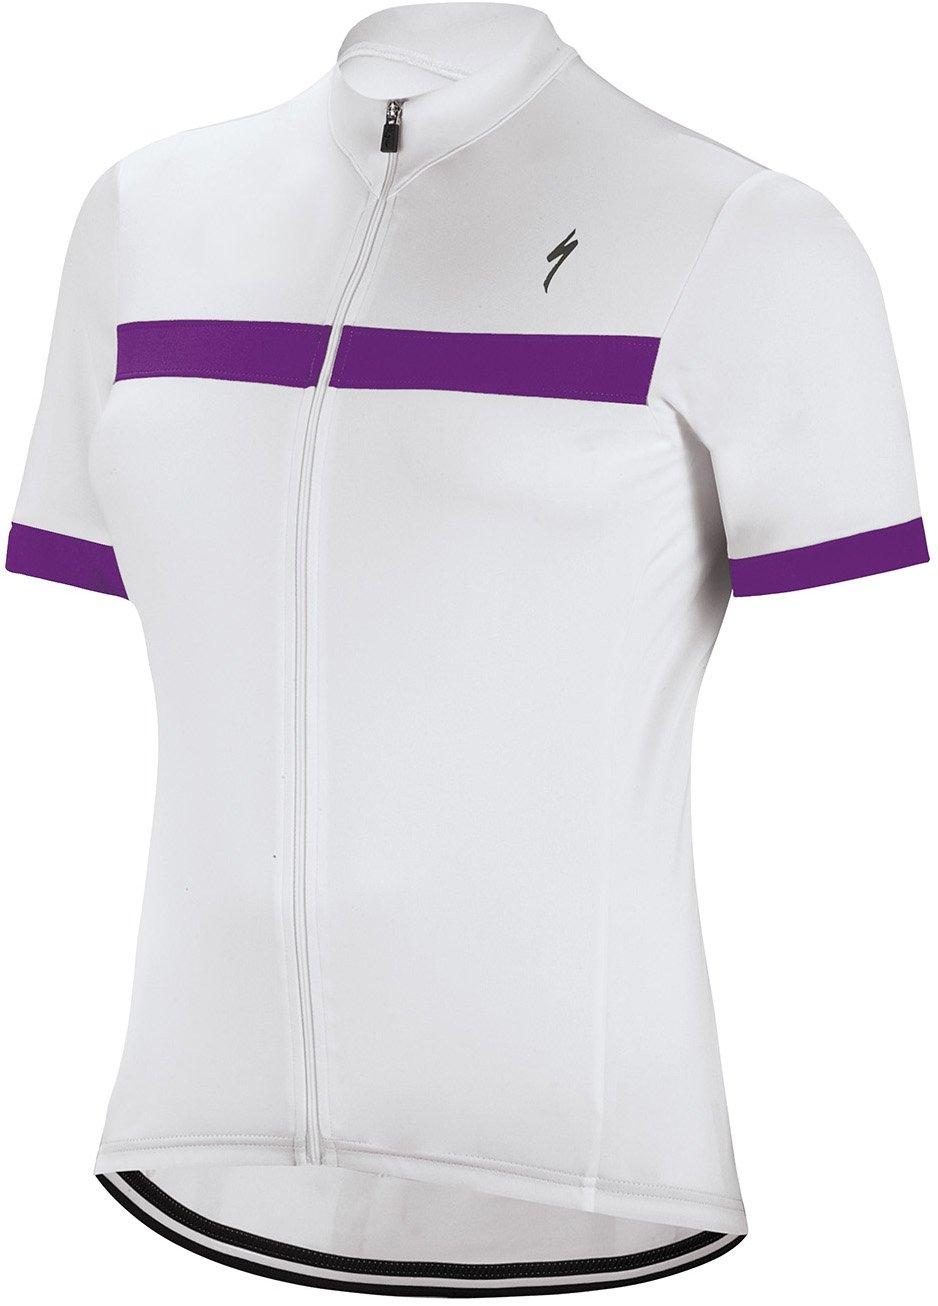 Specialized RBX Sport Short Sleeve Jersey, White